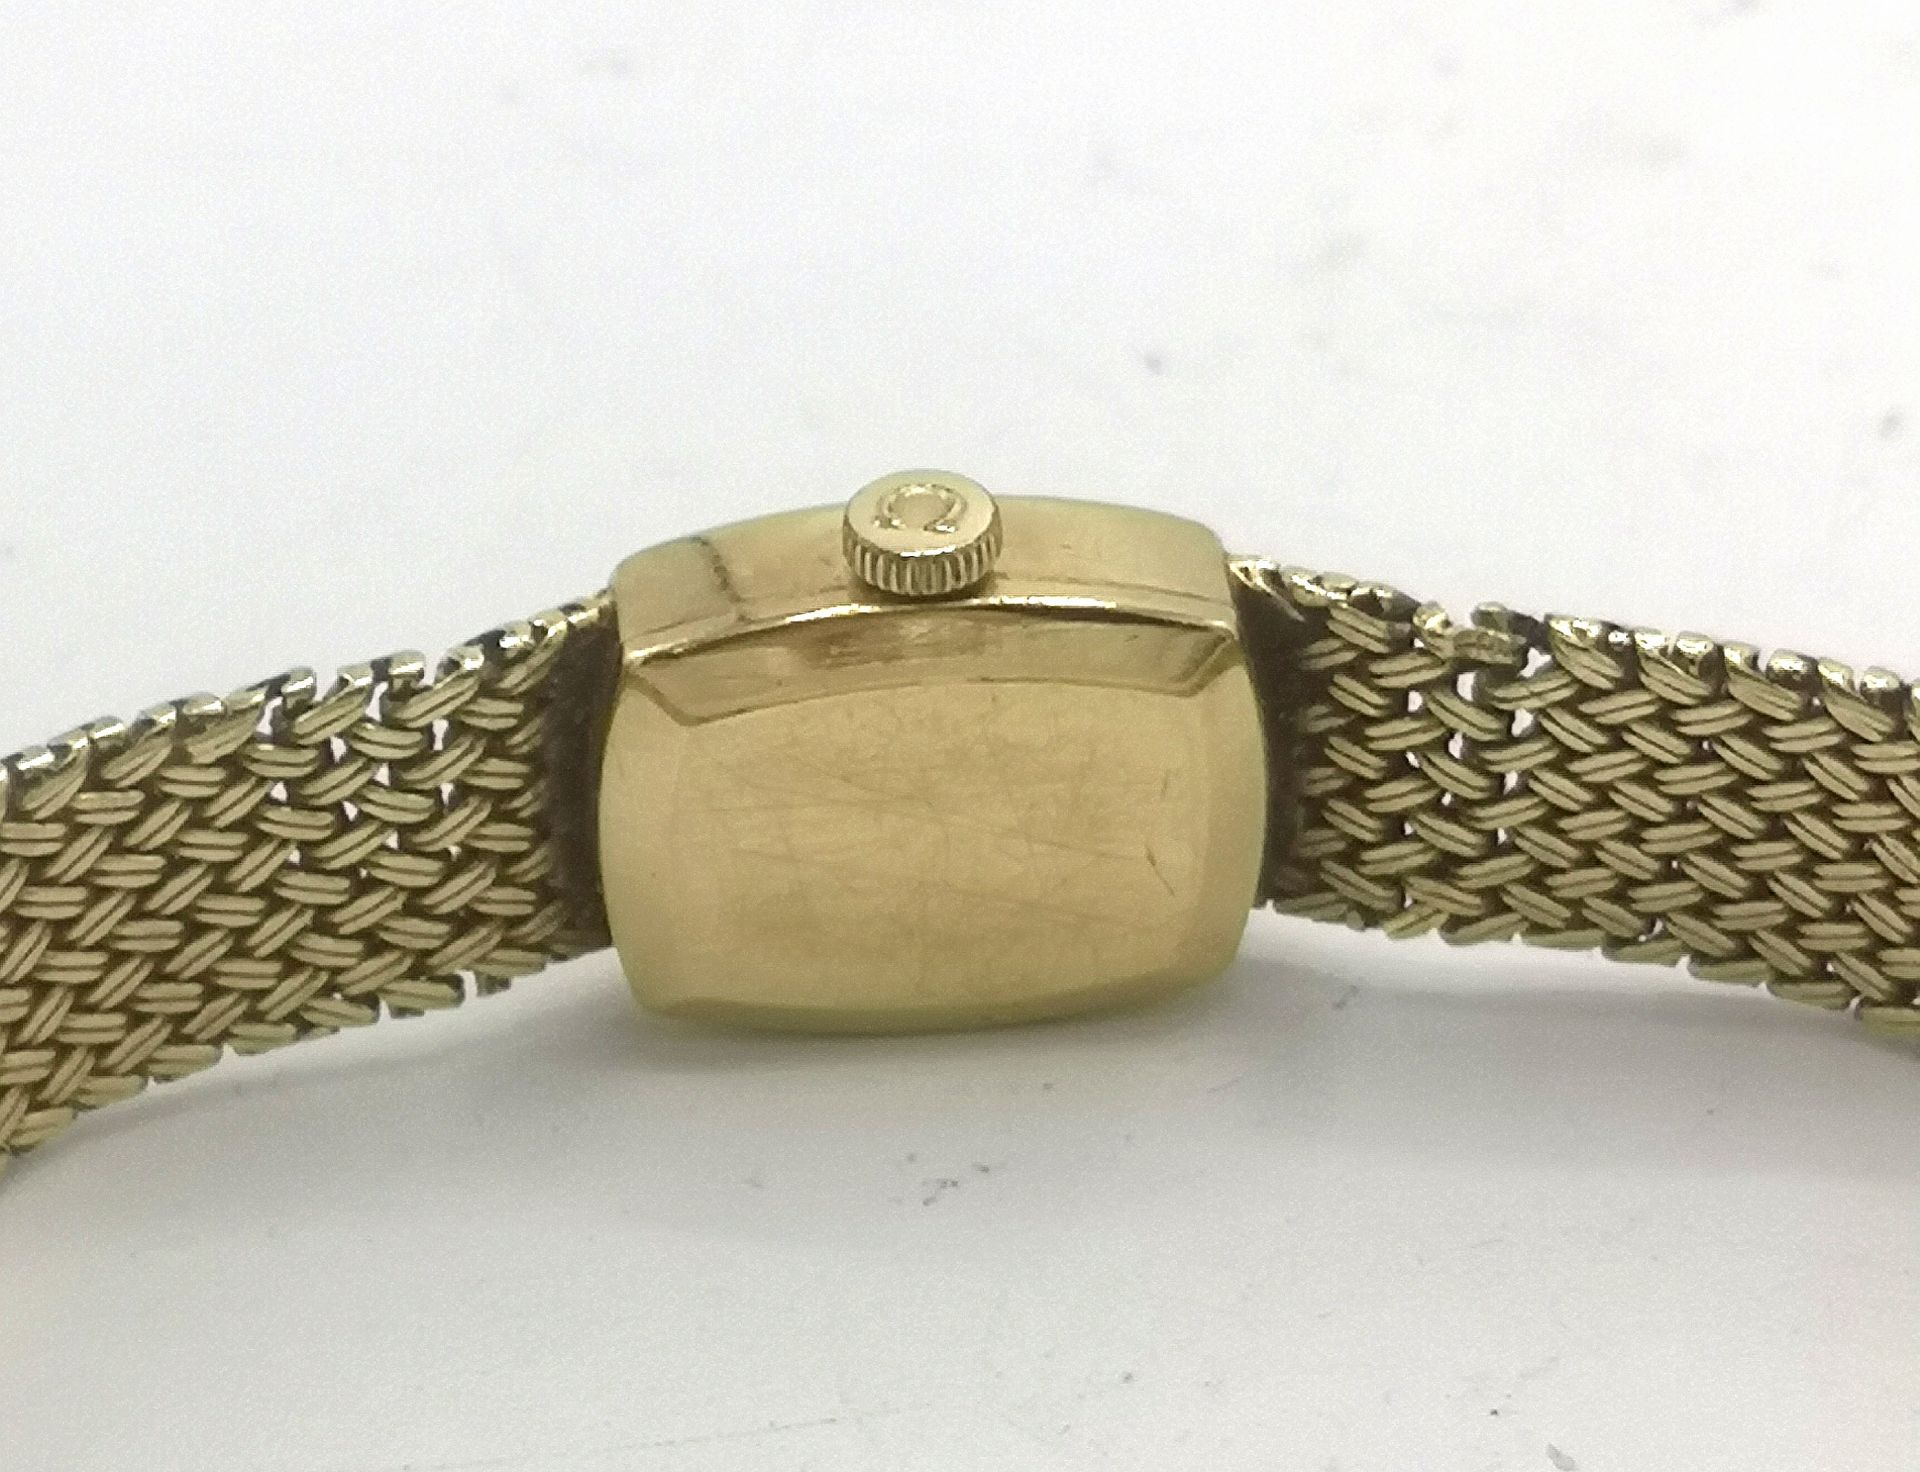 Ladies Omega wristwatch in 9ct gold case - Image 4 of 8